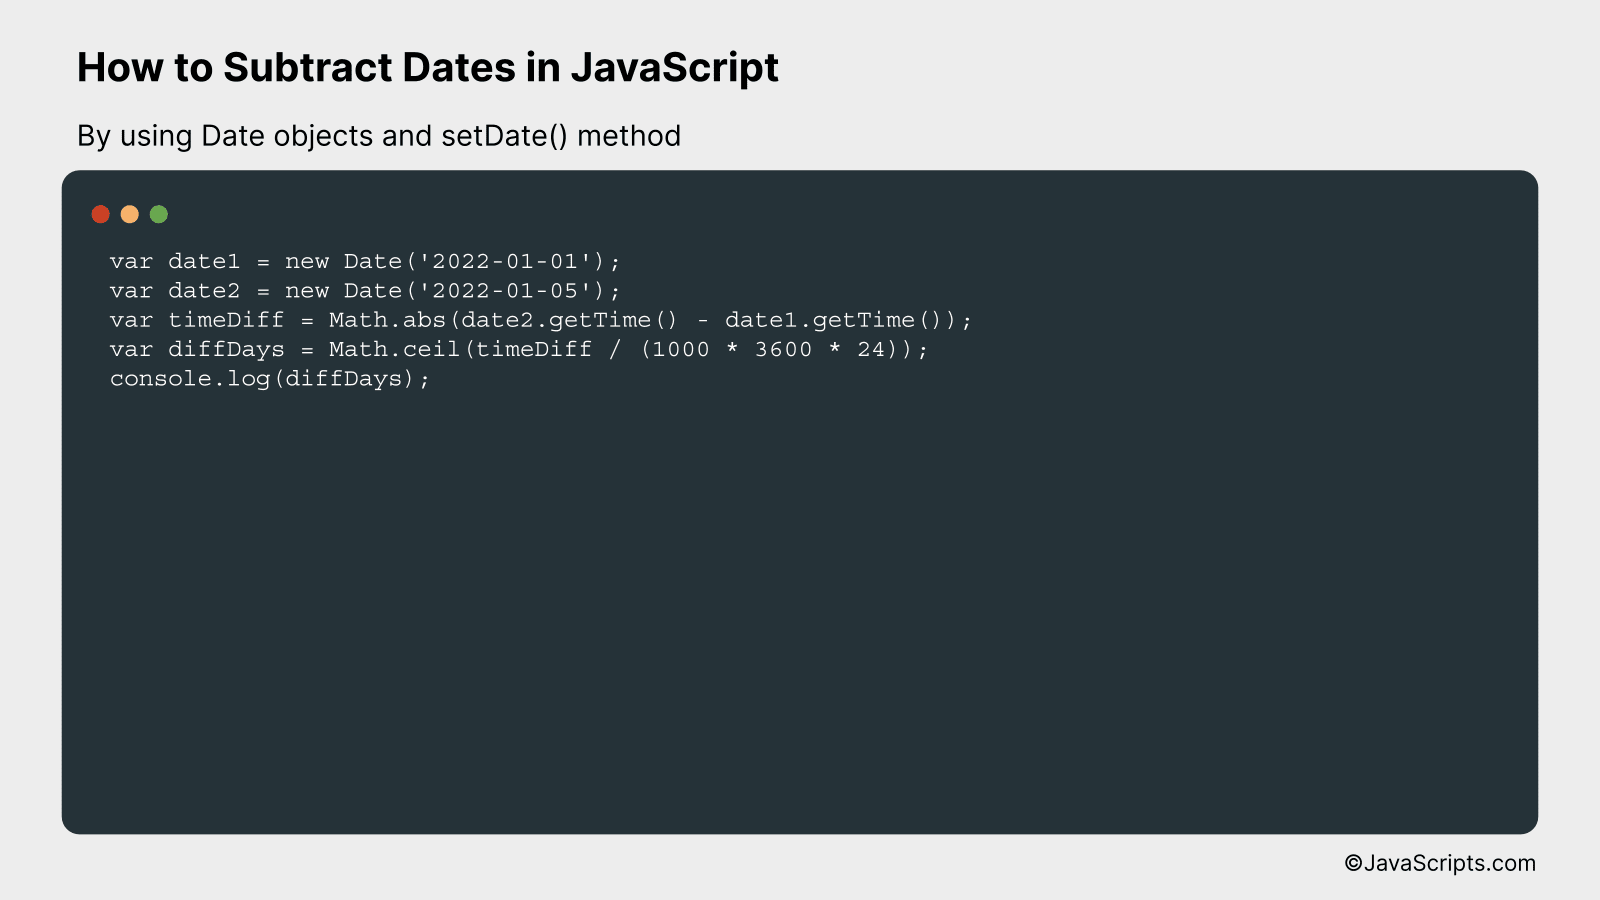 By using Date objects and setDate() method